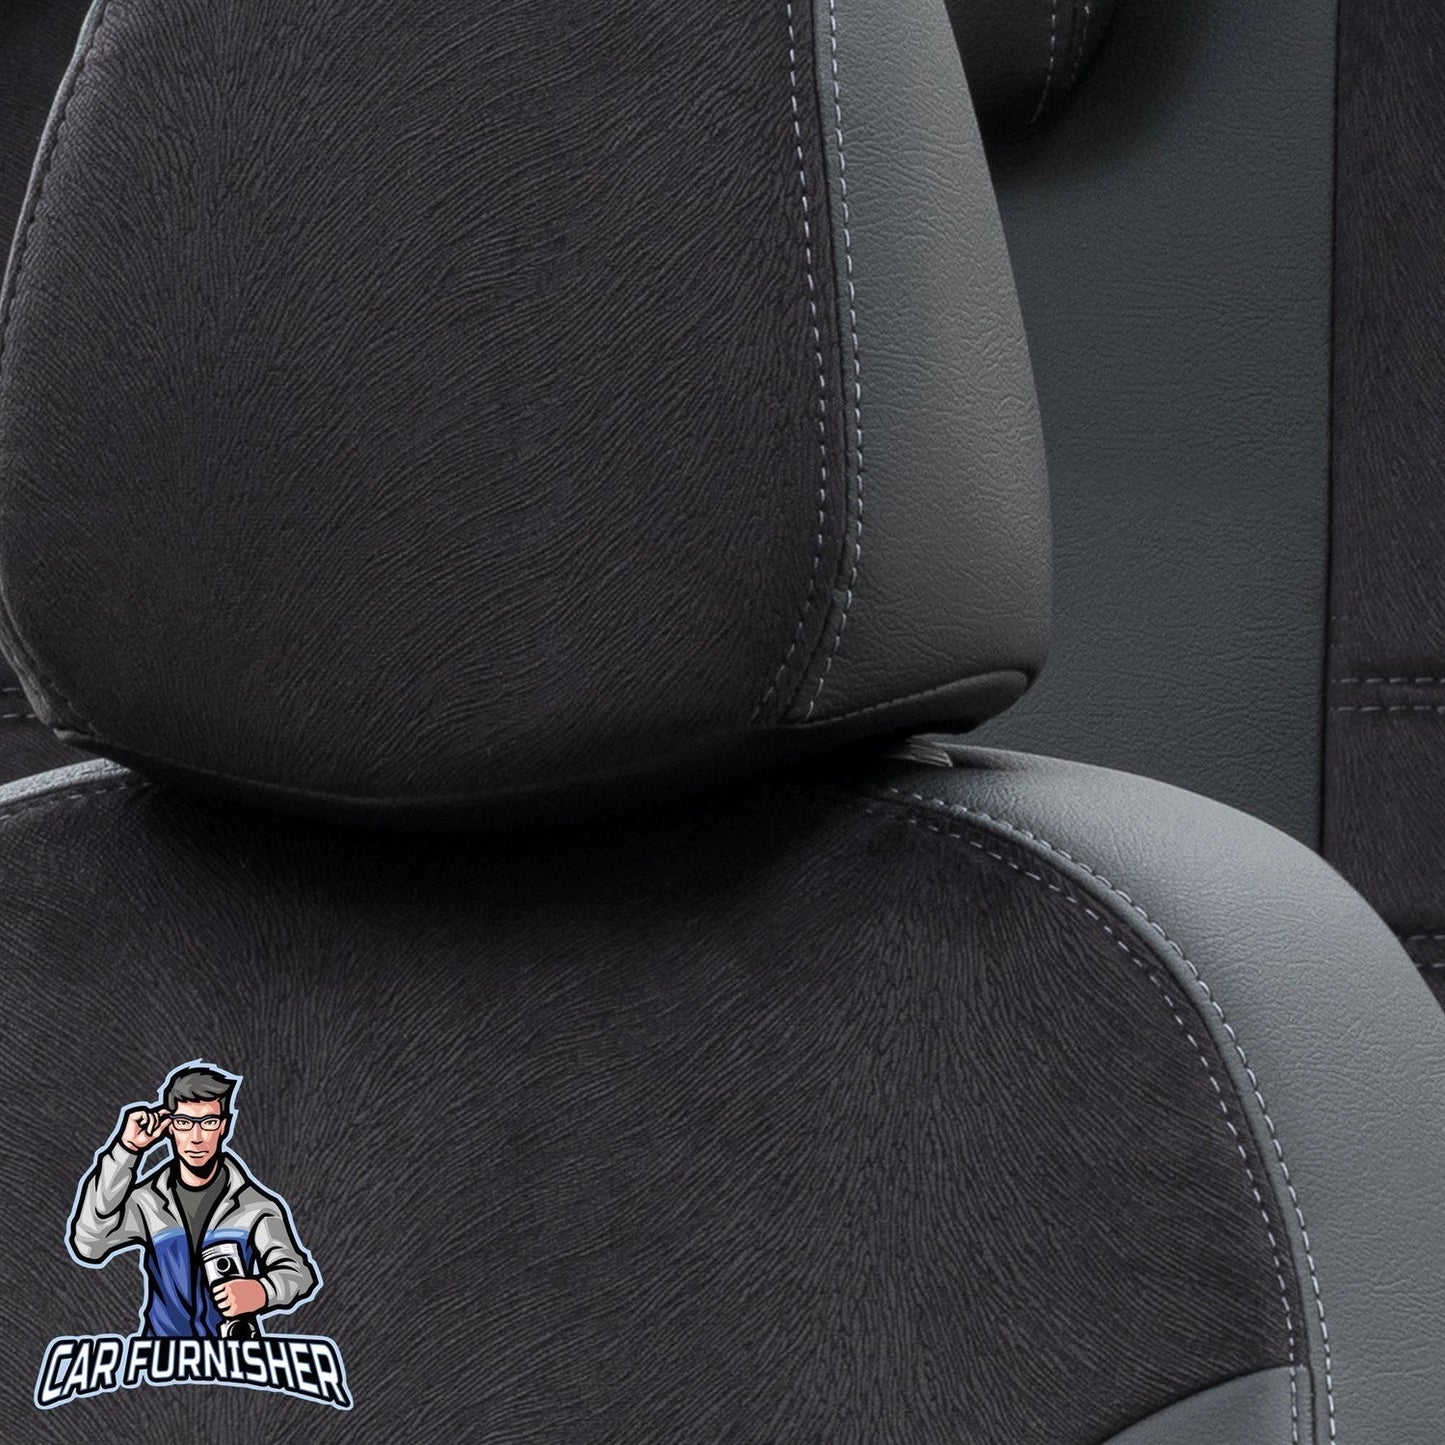 Hyundai H-200 Seat Covers London Foal Feather Design Black Leather & Foal Feather